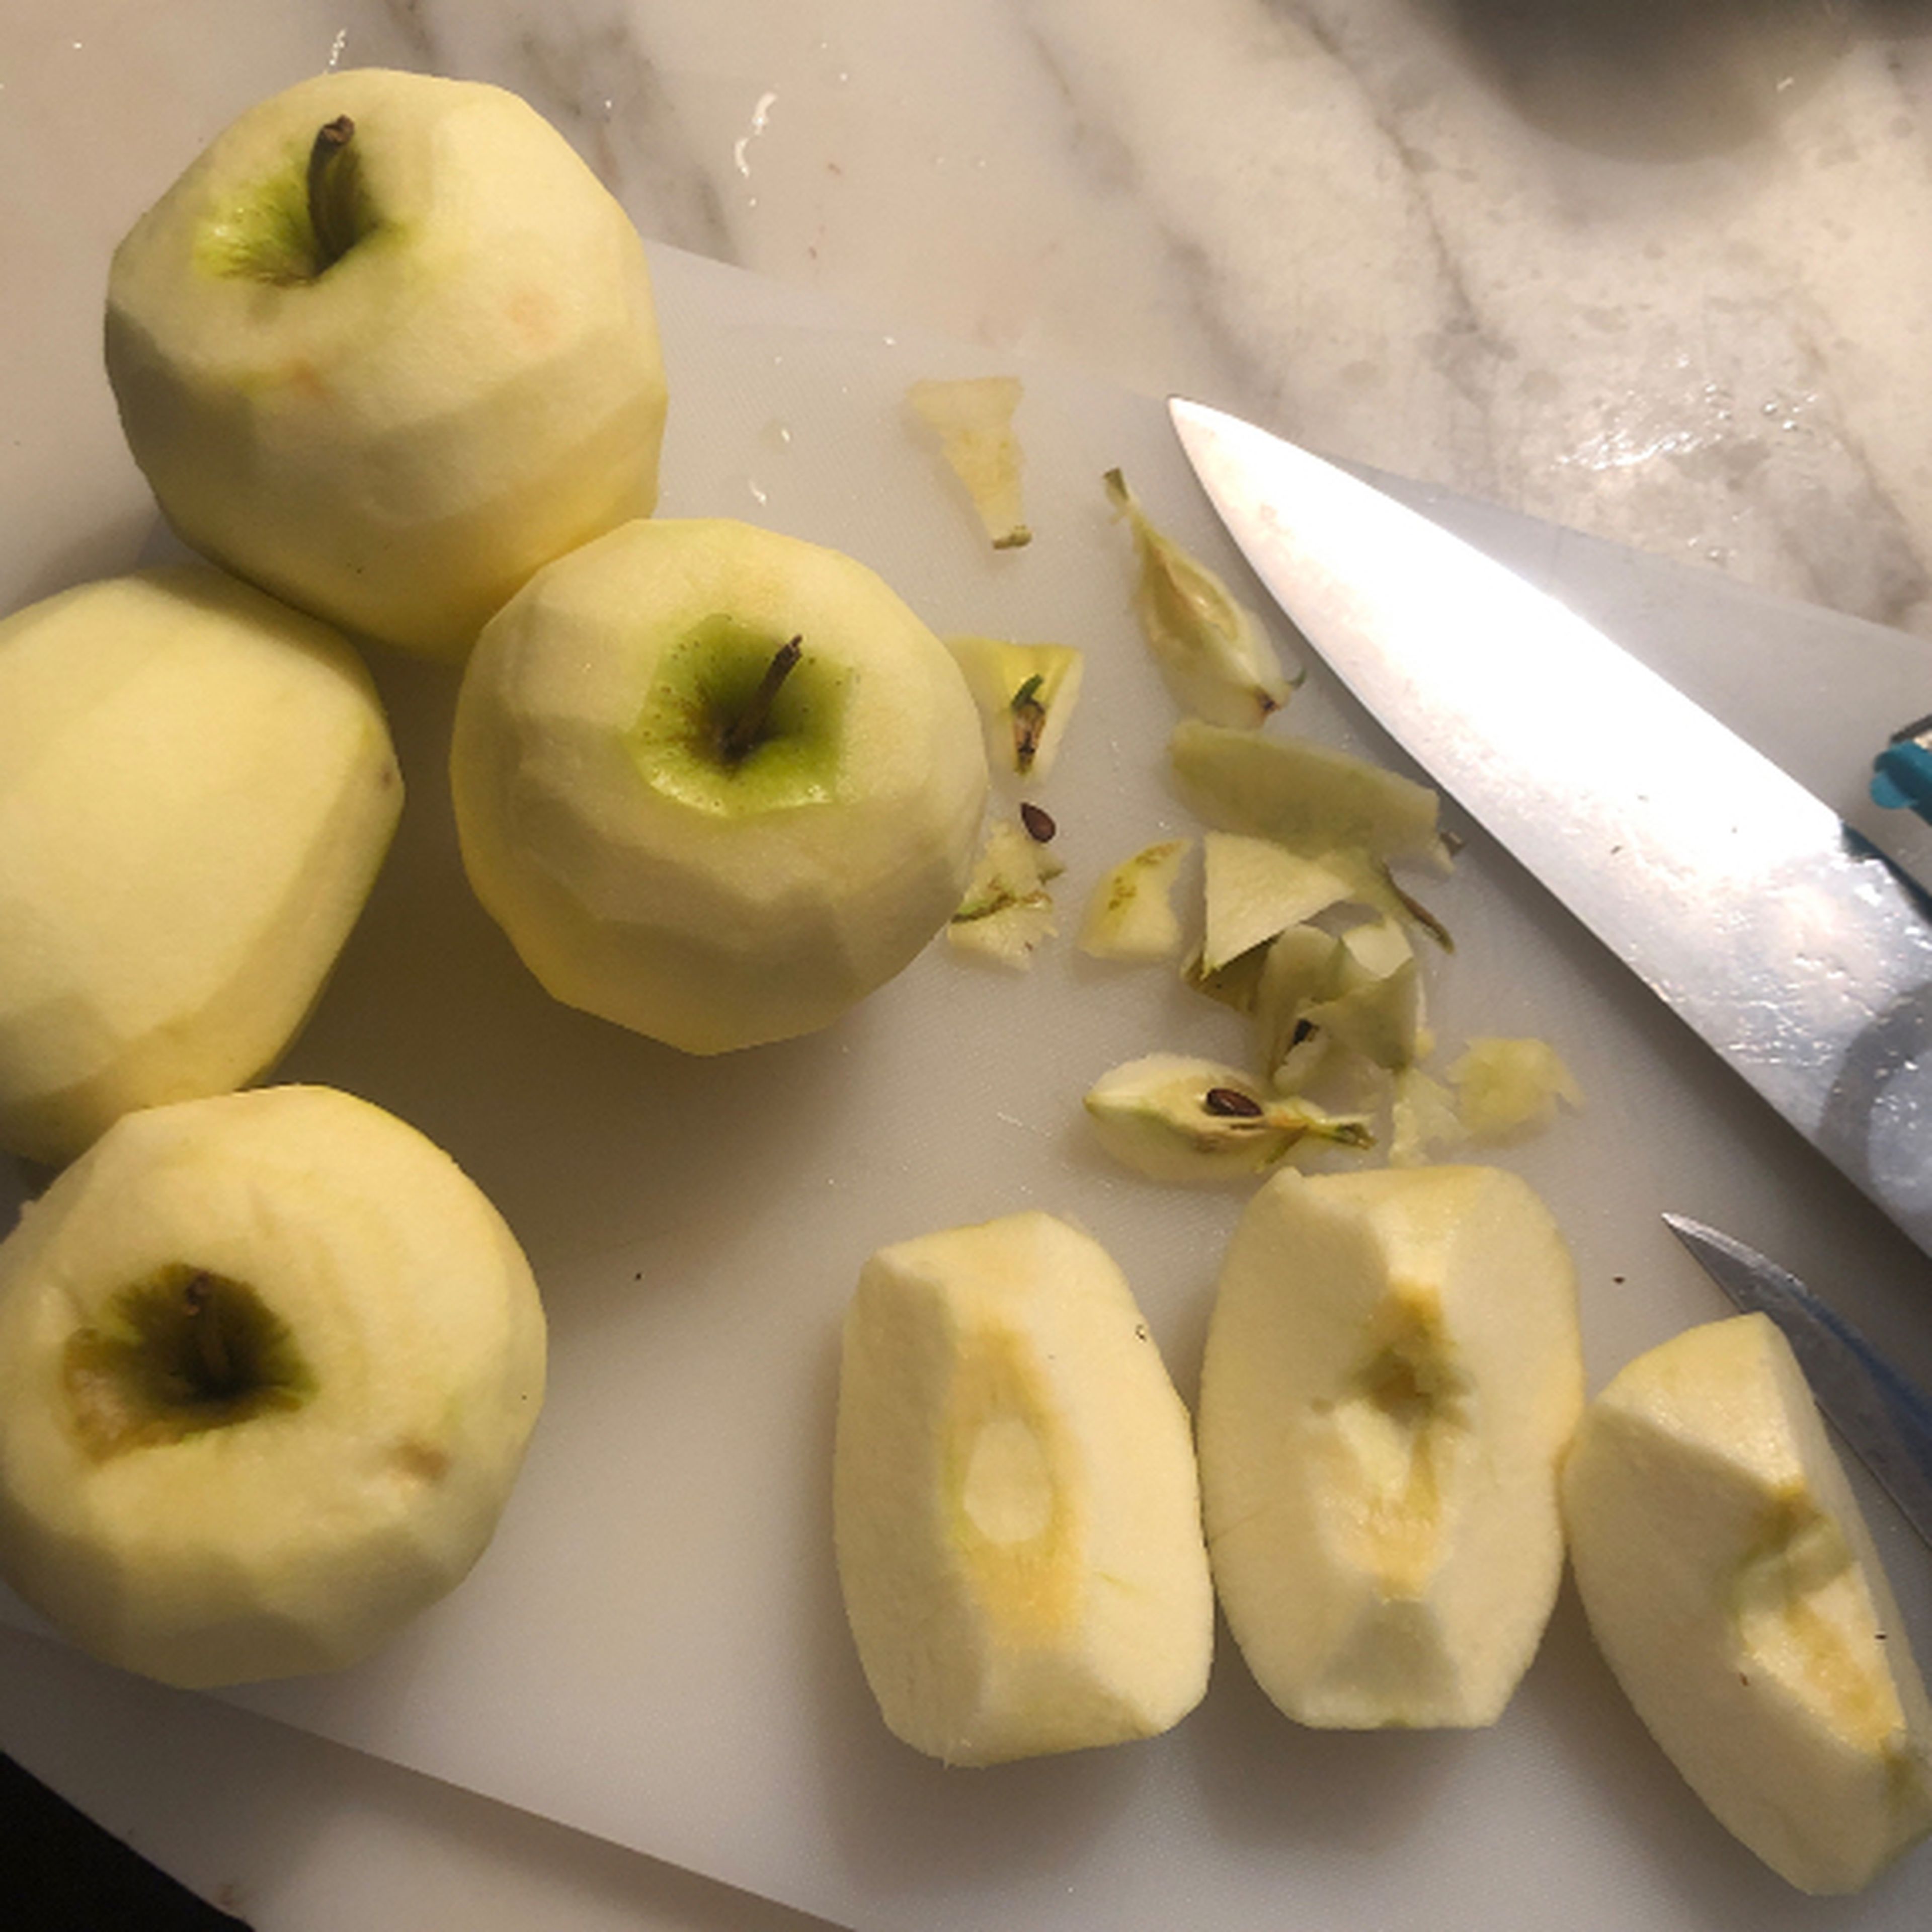 Peel, empty, and cut the apples into quarters (or smaller if desired). Bear in mind these will shrink during baking.